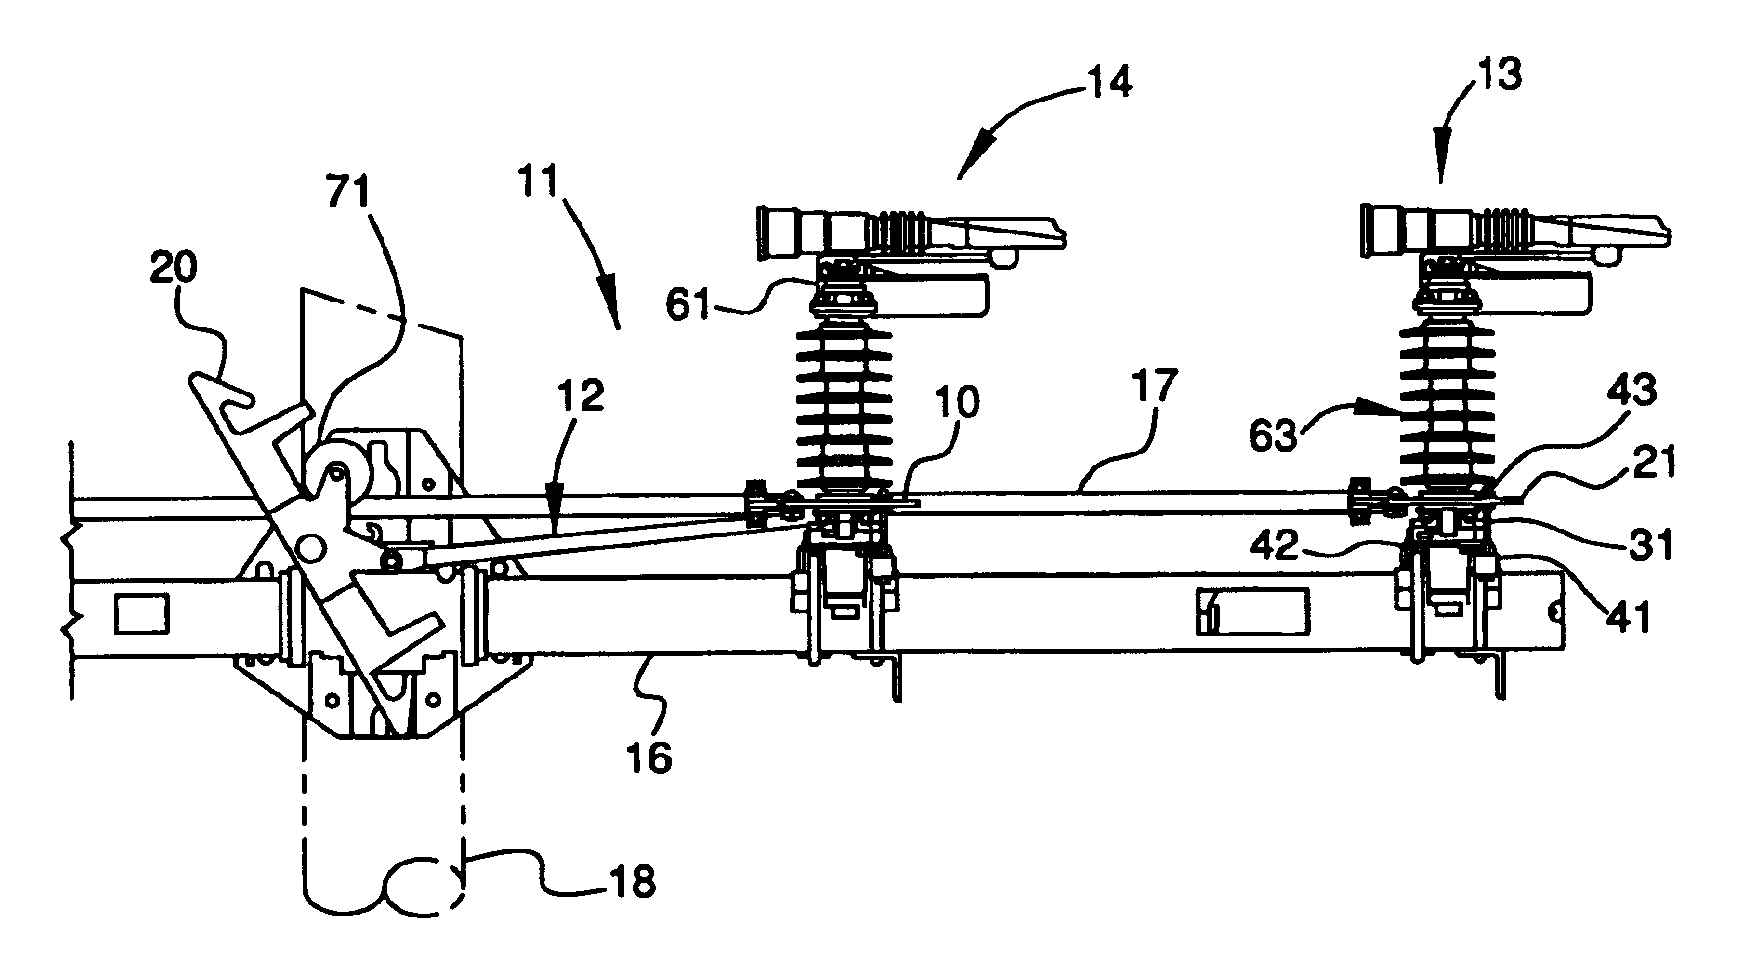 Resistance assembly for hookstick operated switching assembly